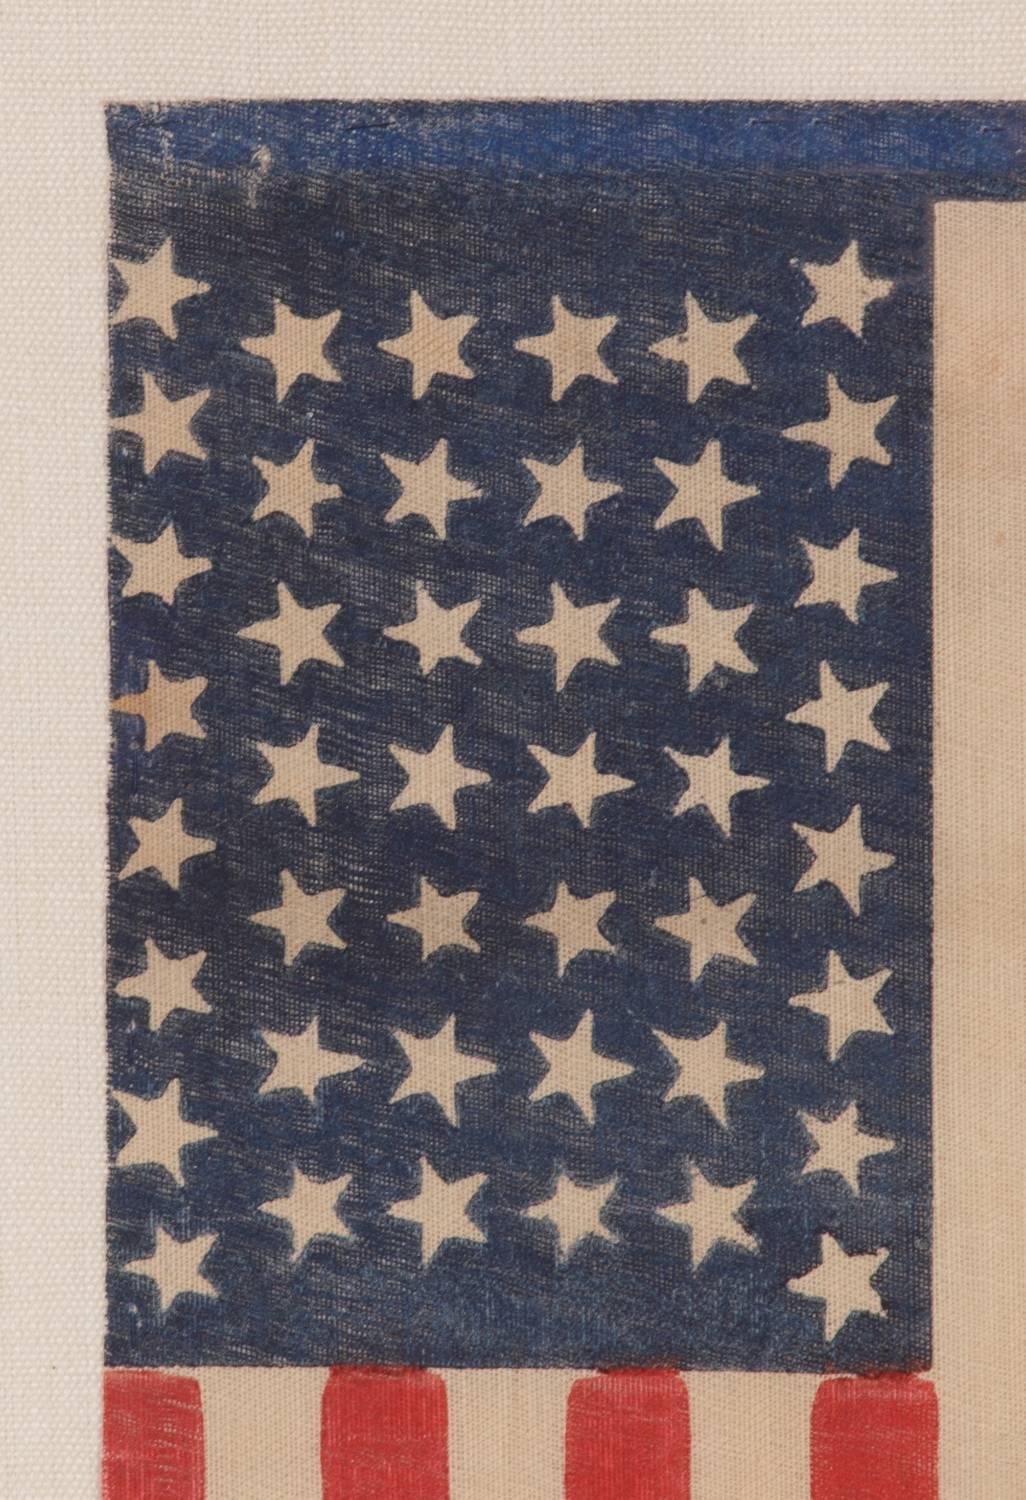 44 Tumbling Stars in an Hour Glass Formation, on an Antique American Parade Flag In Good Condition In York County, PA